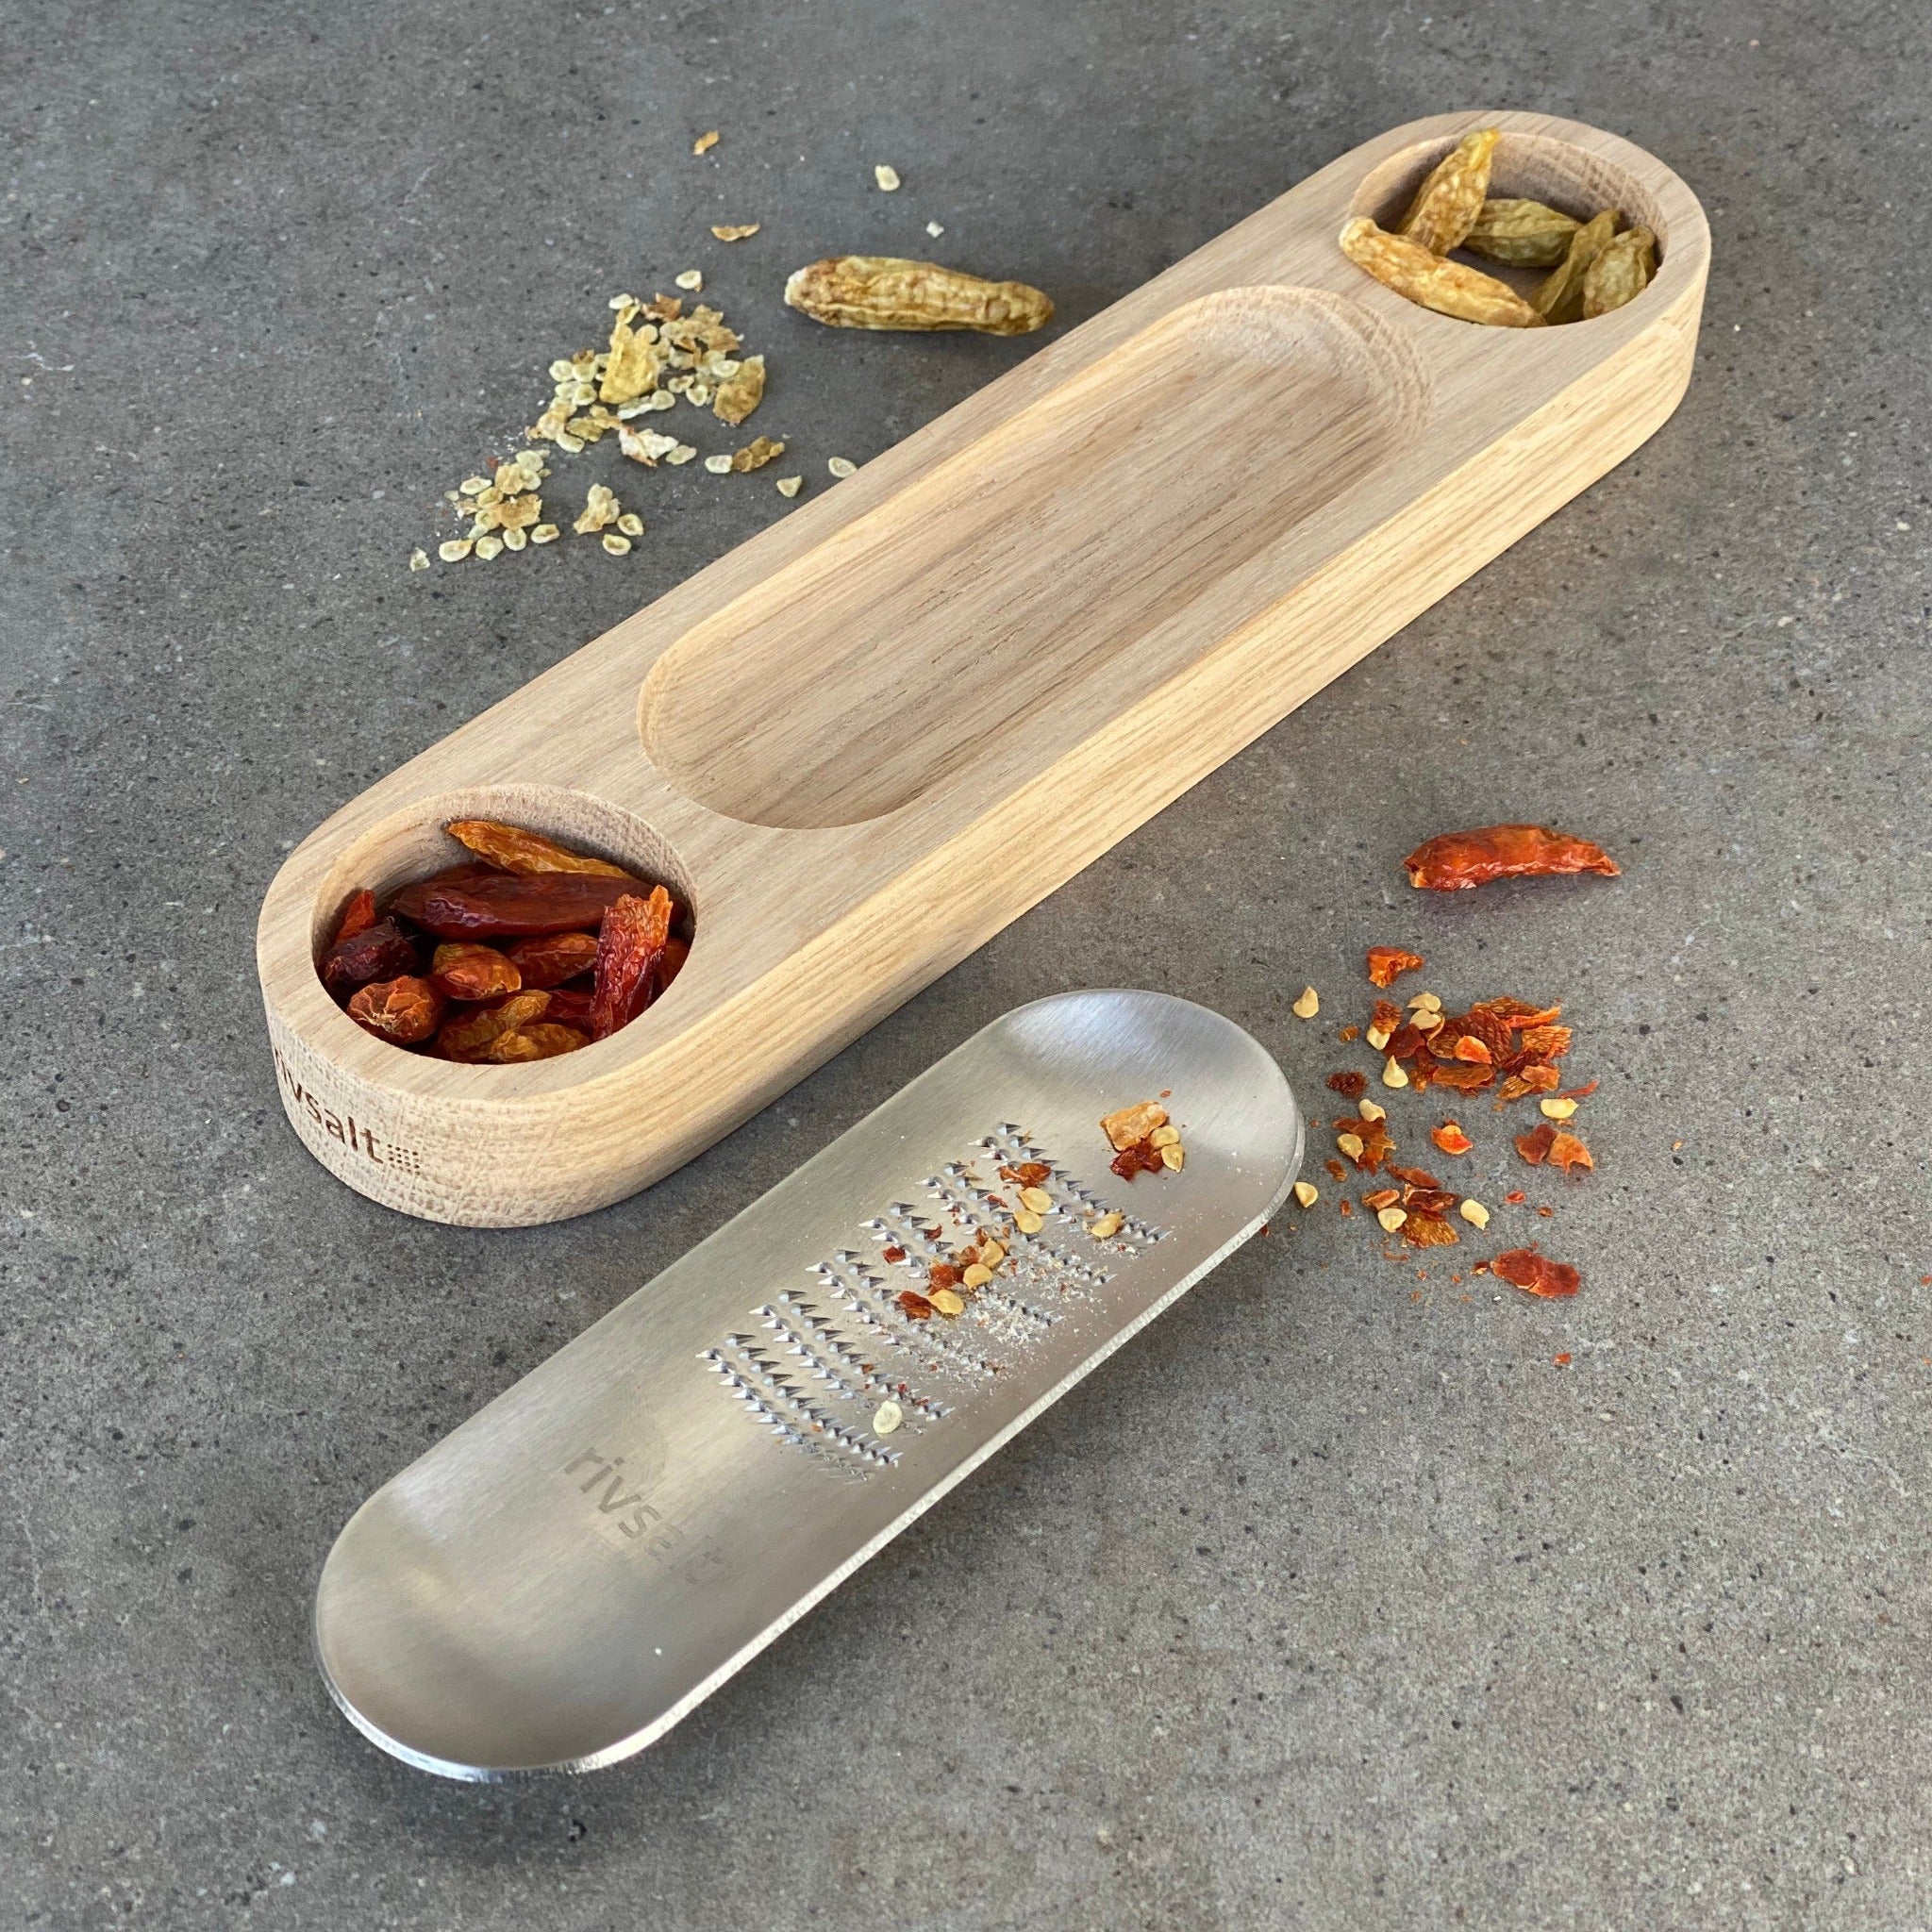 024 CHILI - stainless steel grater. stand in natural oak. two types of dried organic chili peppers. sleek flat gift pack.